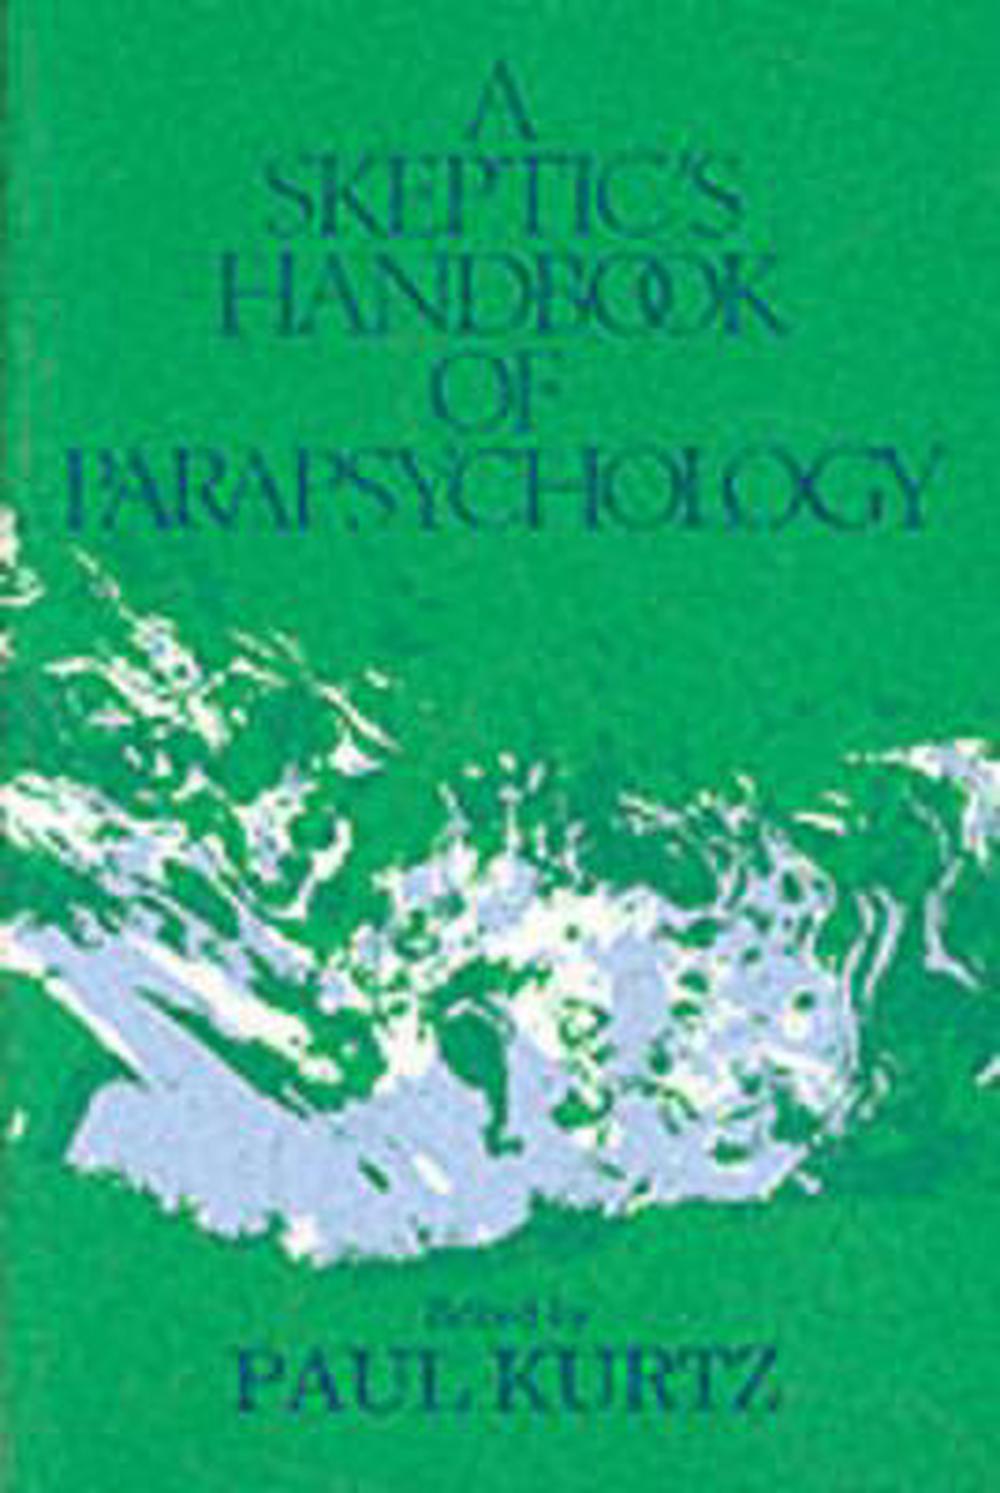 research books about parapsychology